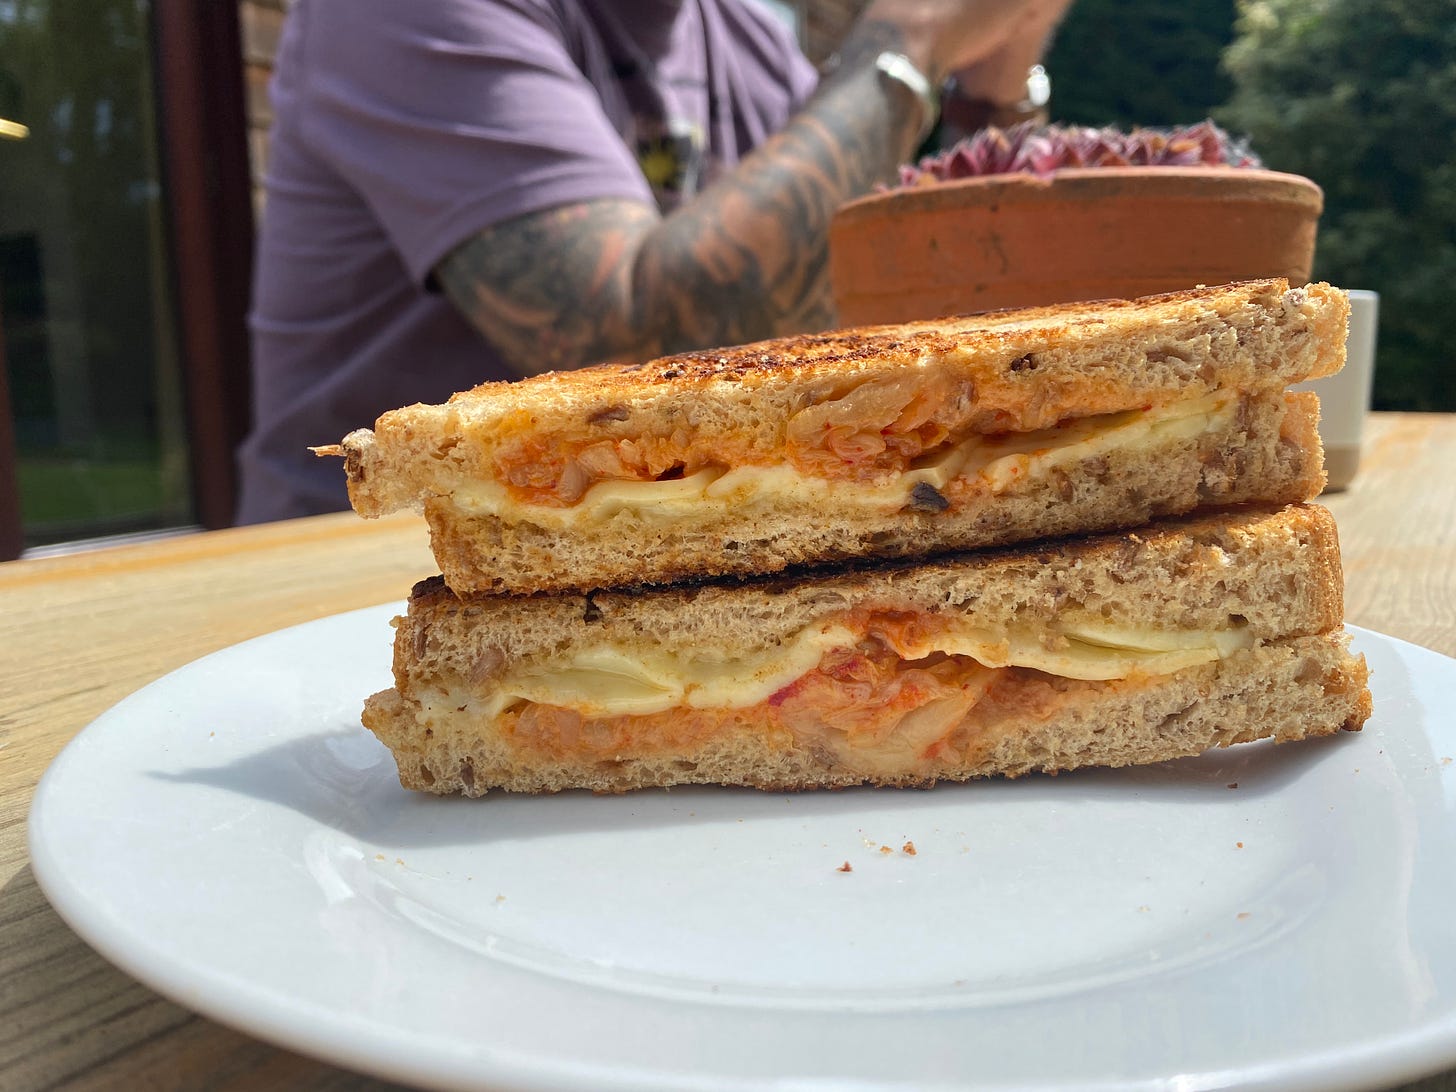 Sandwich sliced in two, placed on a white plate. Open ends of the sandwich shows a filling of cheddar cheese and kimchi. A person sits behind eating.